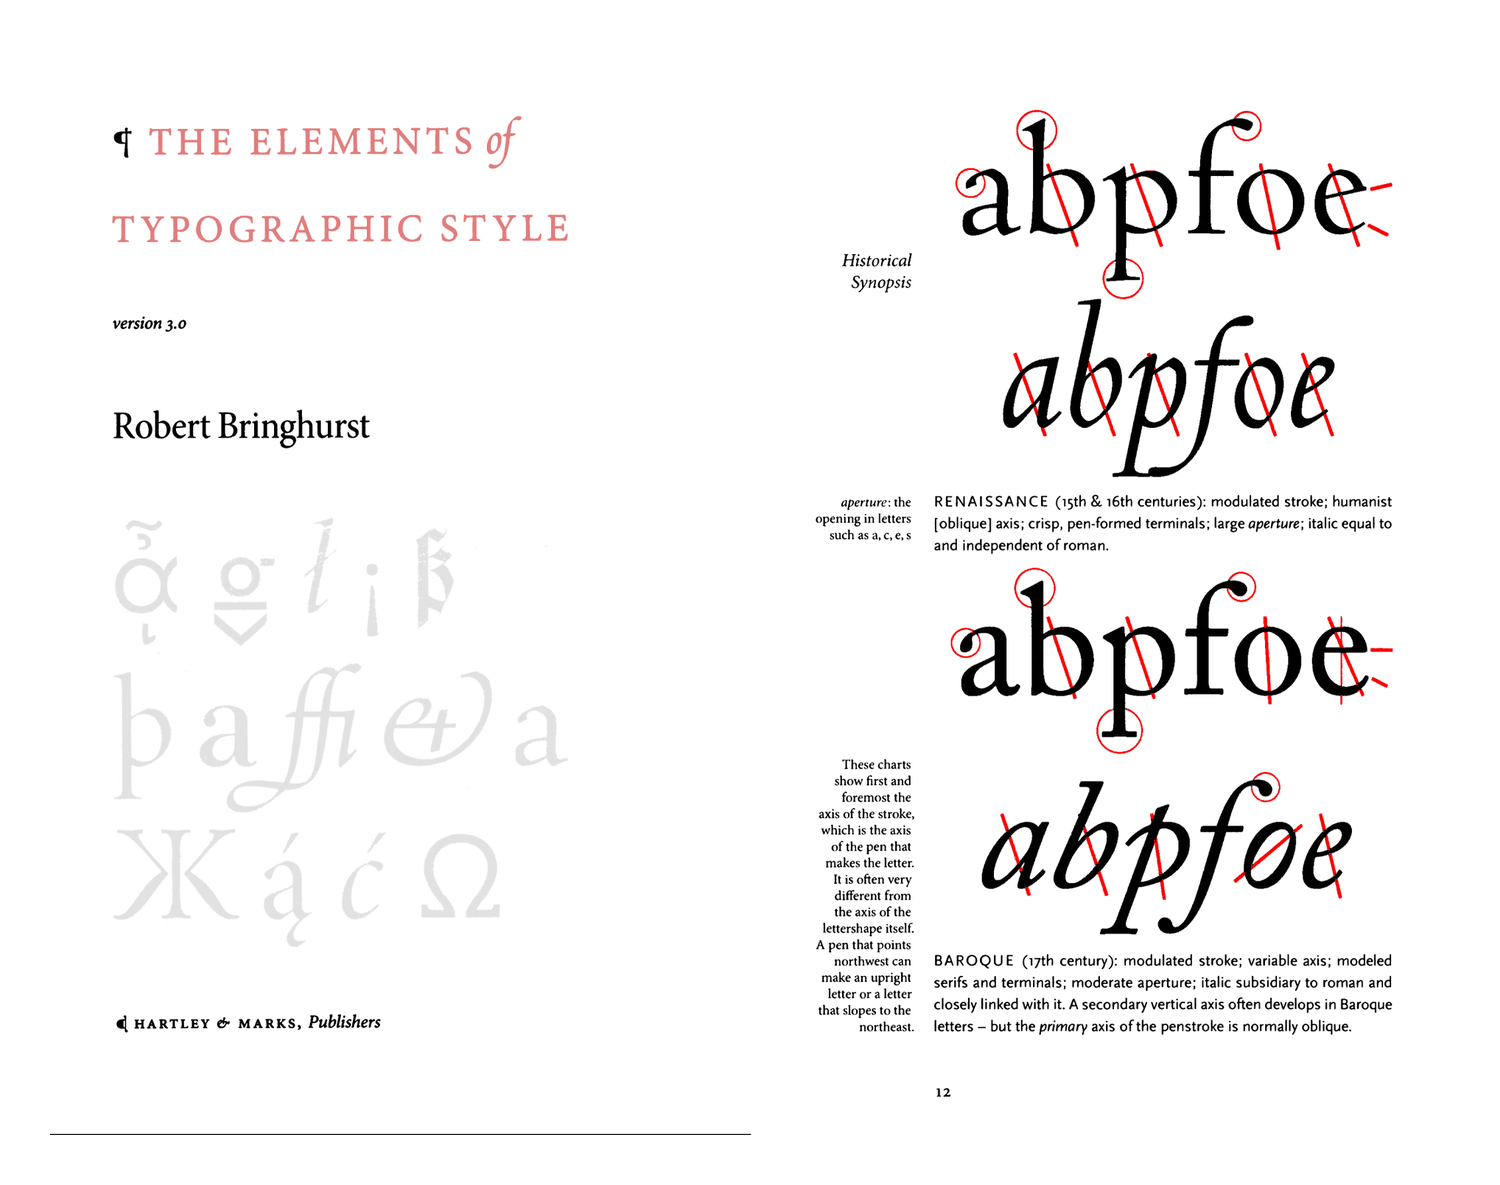 Bringhurst 2004 (The Elements of Typographic Style) uses primarily grayscale but—true to his comments on red—turns to it for the occasional inside-cover text or for diagrams of letters (starting pg12).